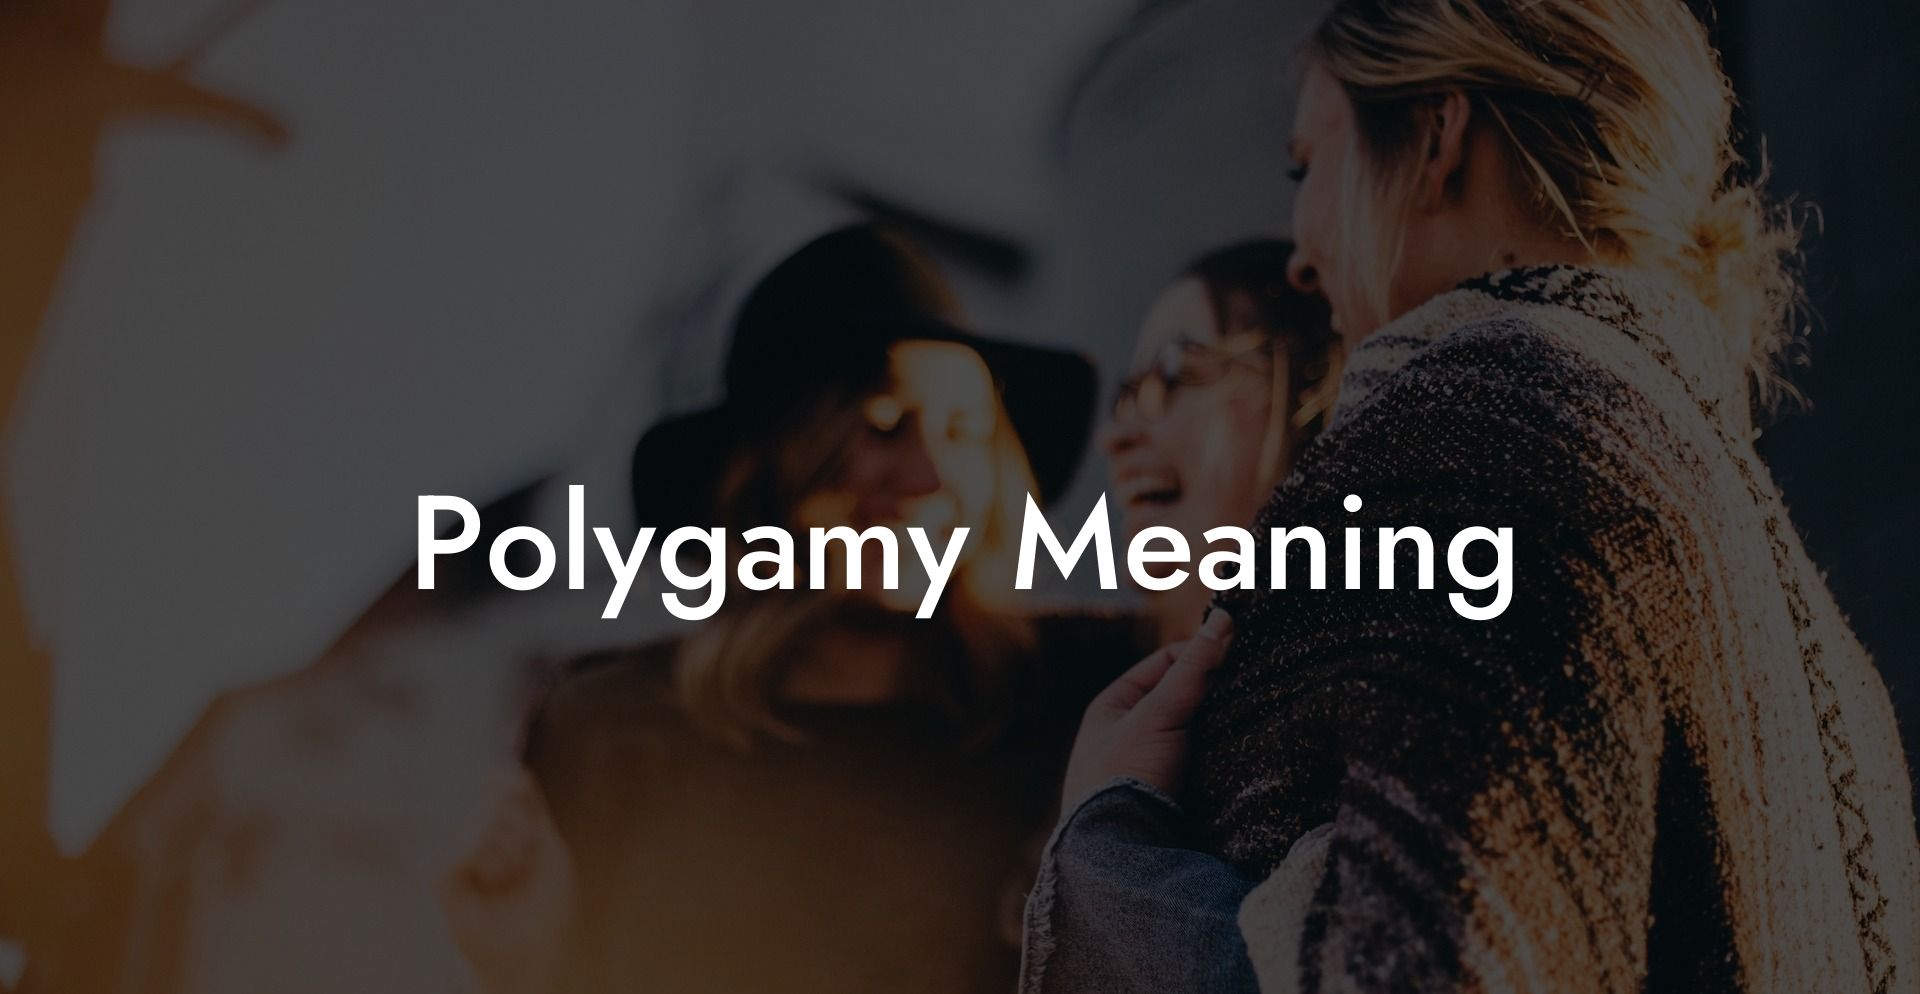 Polygamy Meaning